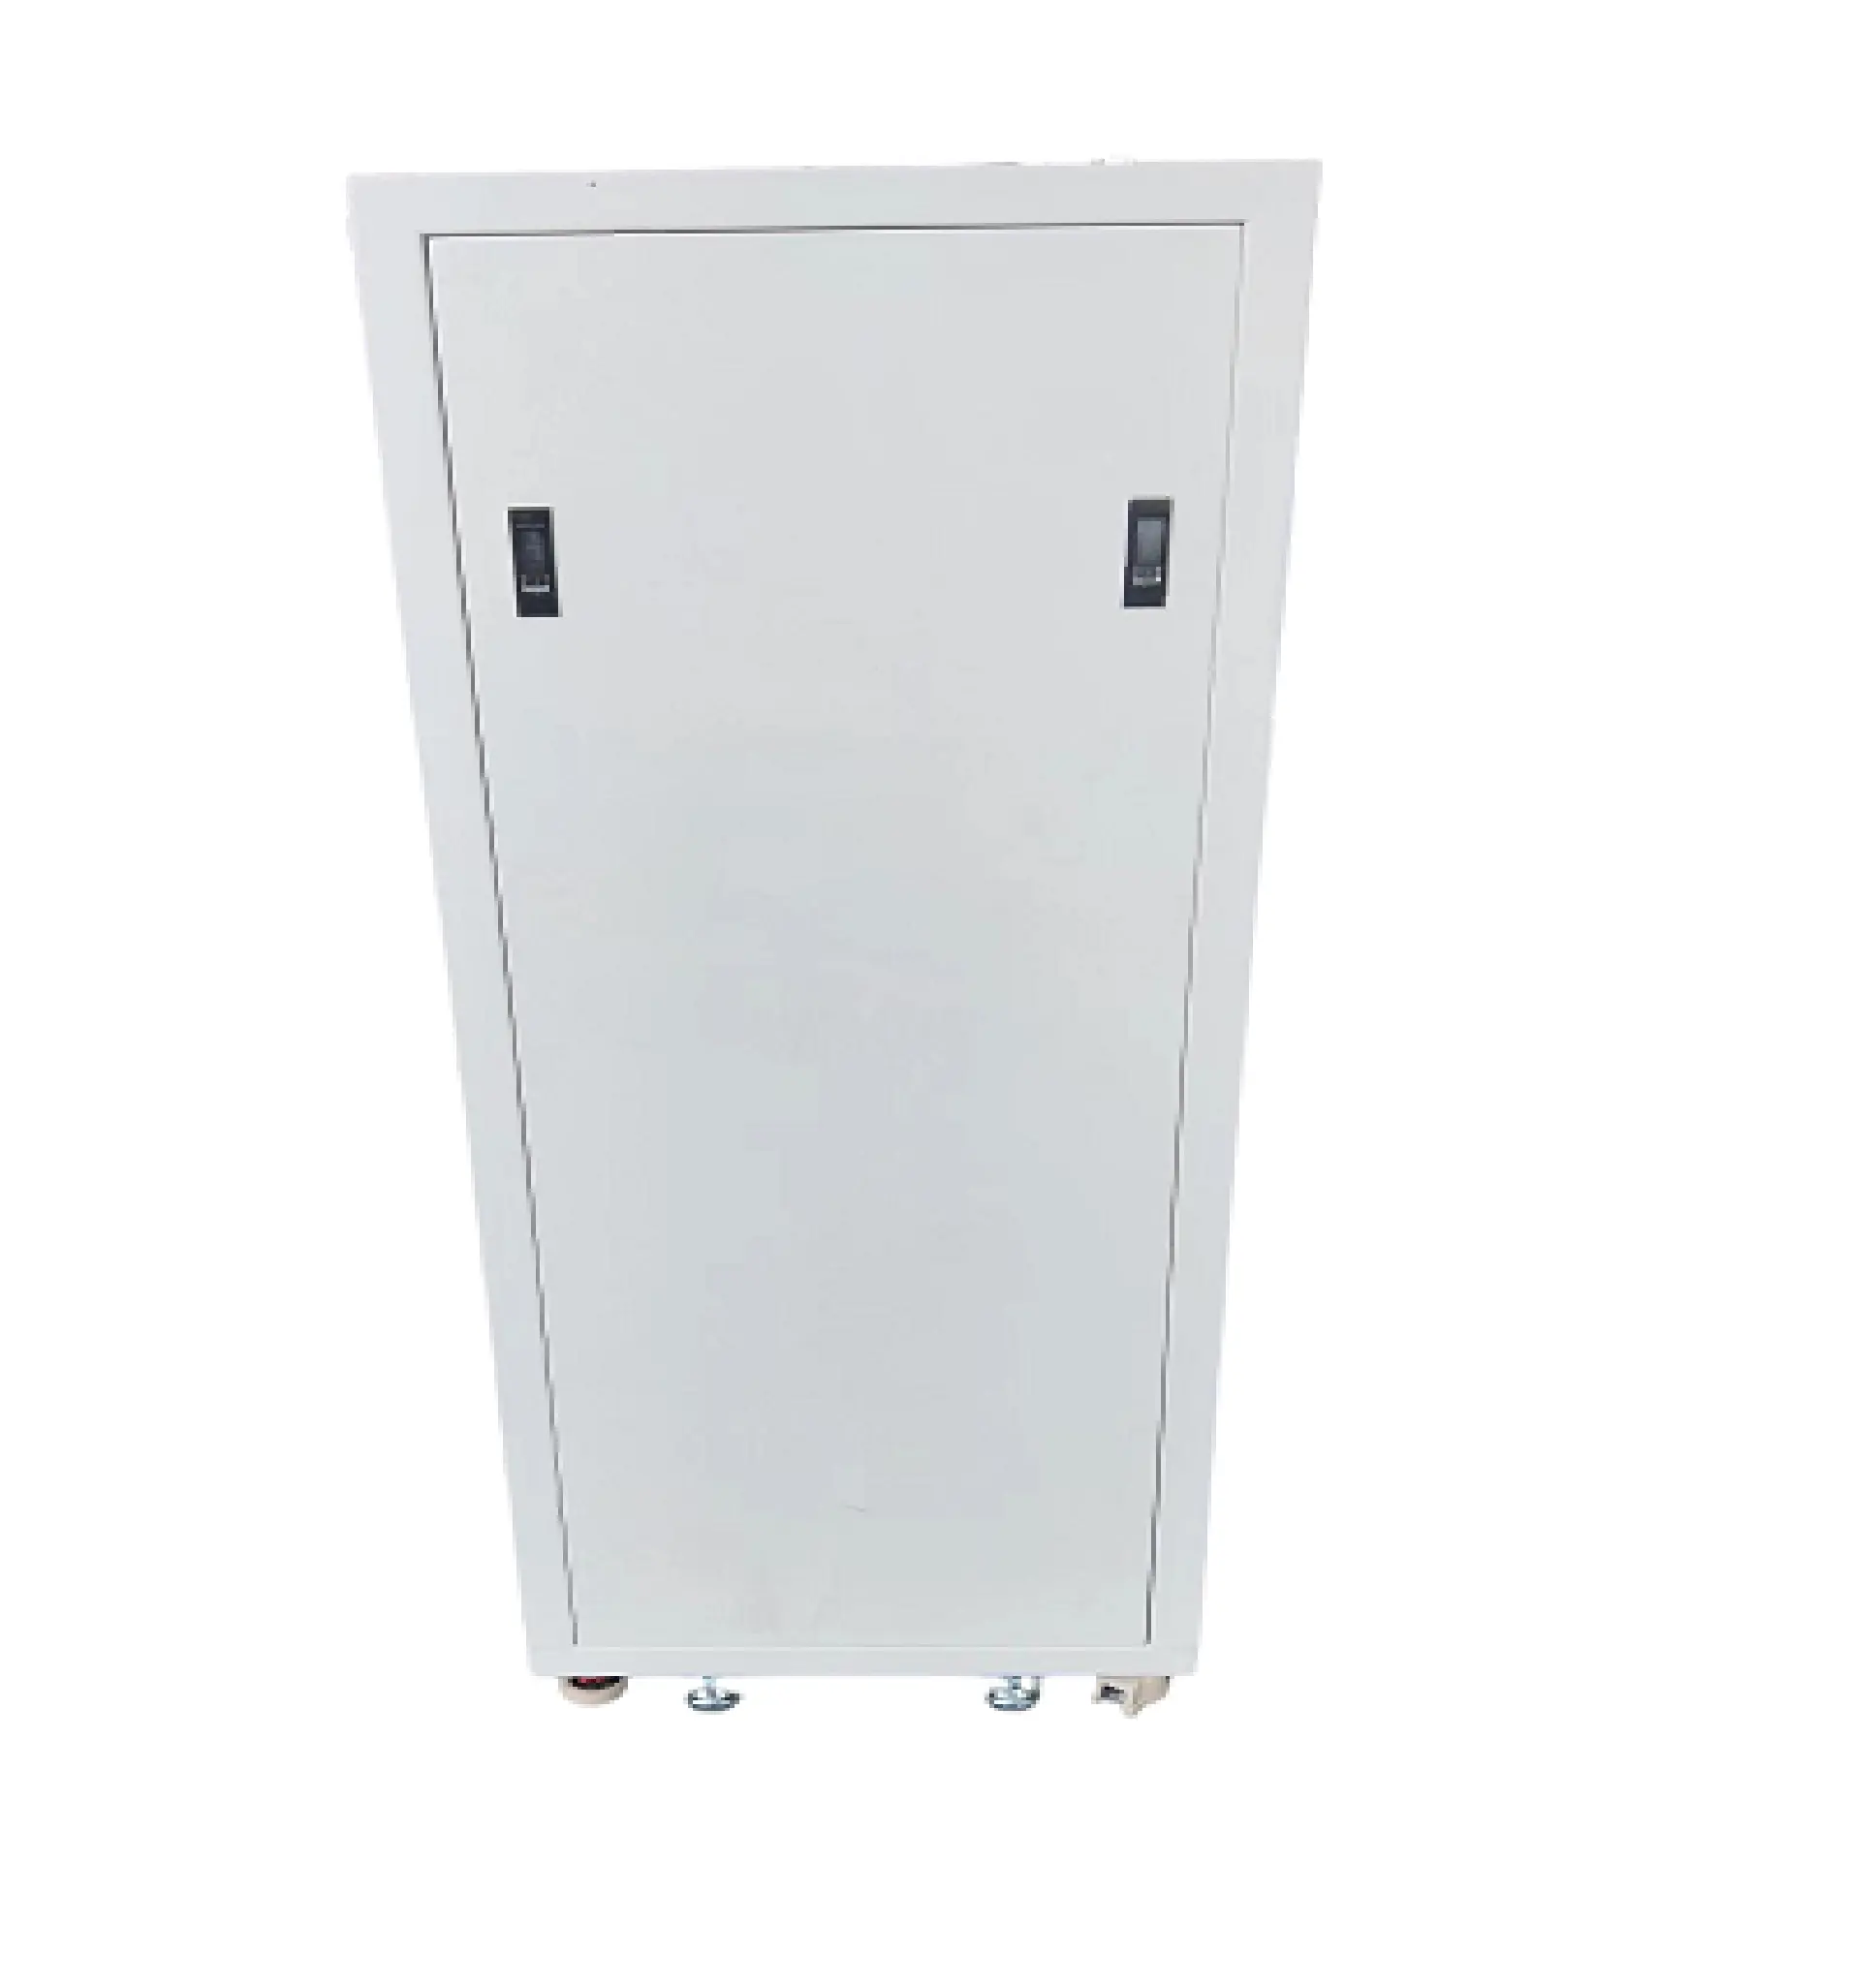 Best-seller in Nanfeng Company & custom lots kinds of distribution box